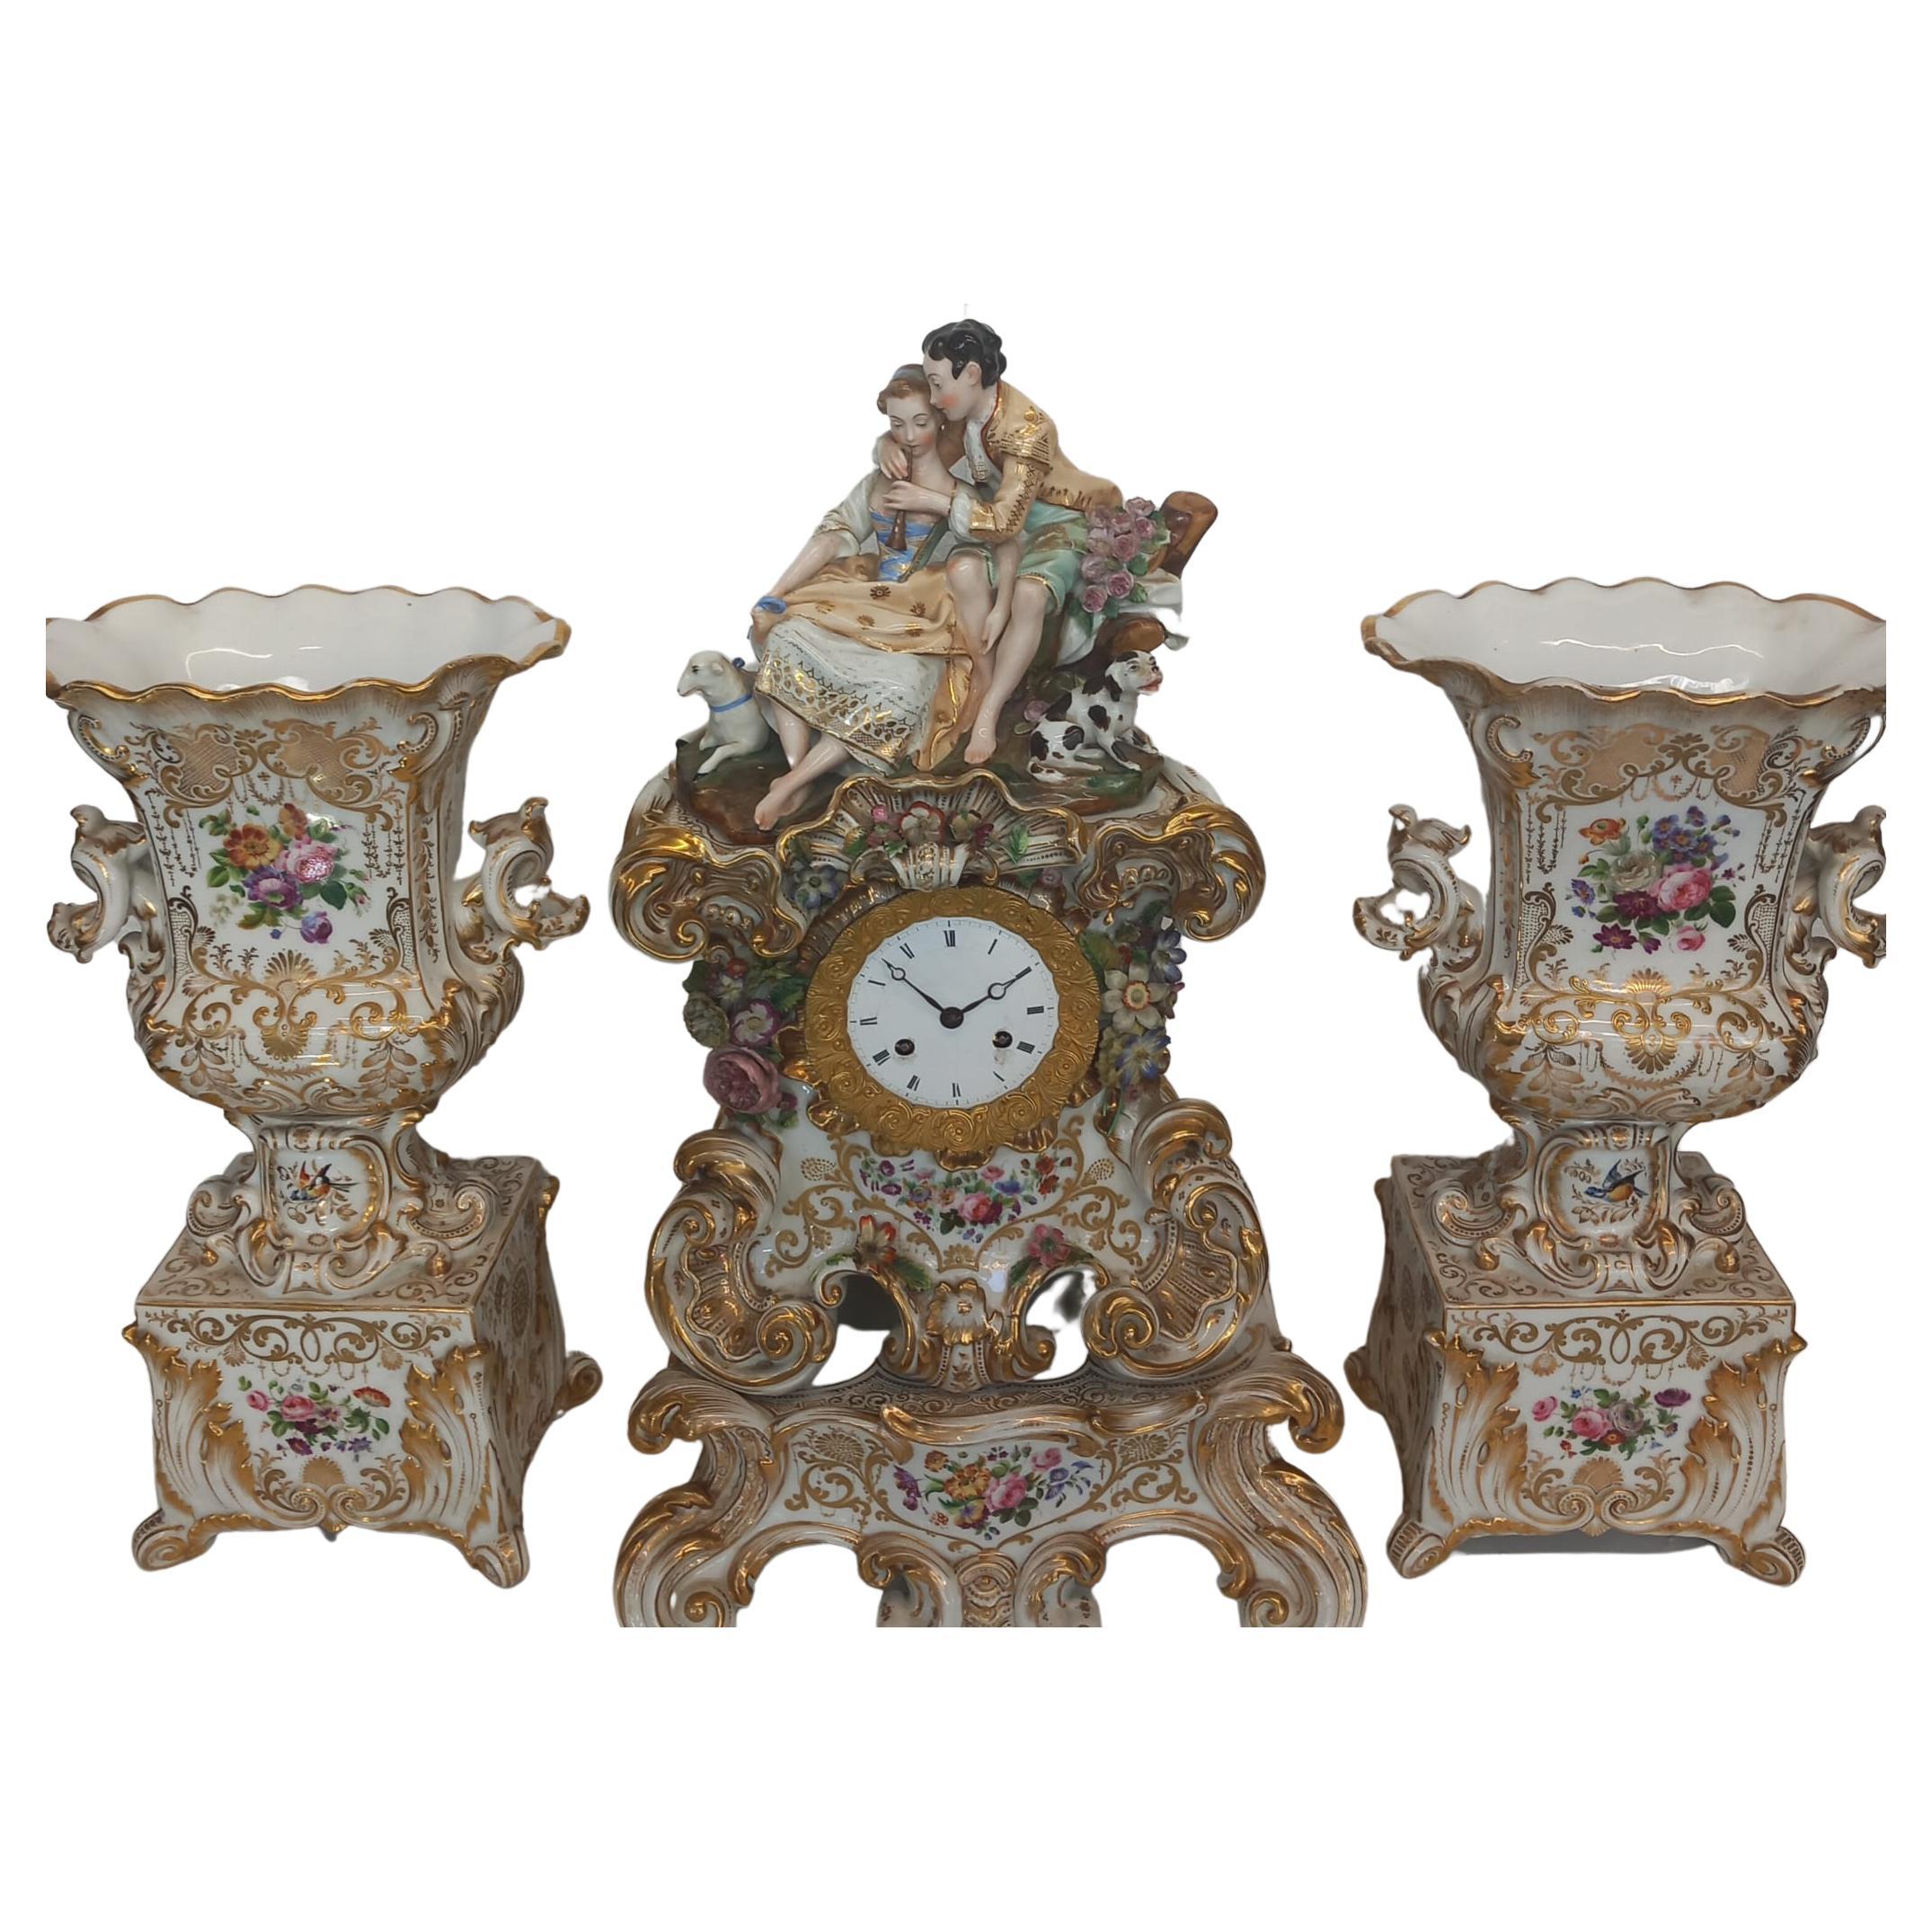 An elegant mantle piece clock with vases made in Paris circa 1860 For Sale